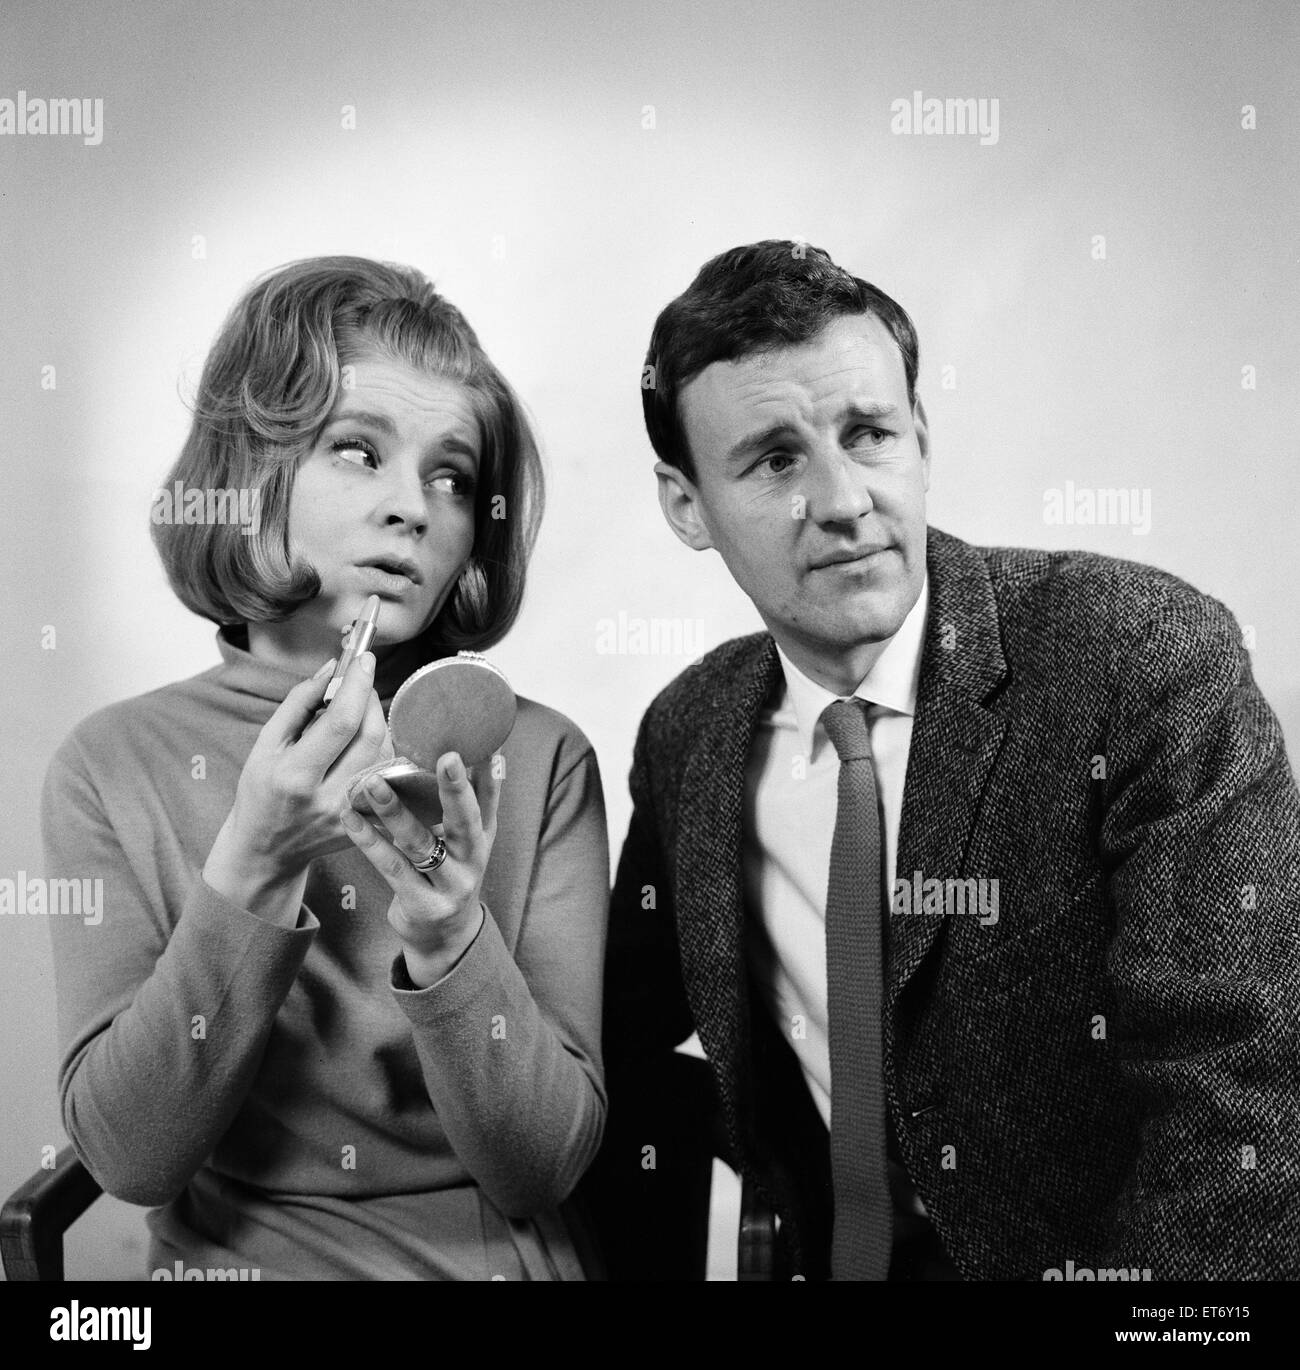 Stars of The Marriage Lines, BBC TV Comedy Series which takes a light hearted look at newly weds. Prunella Scales as Kate Starling & Richard Briers as George Starling. 25th September 1964. Stock Photo